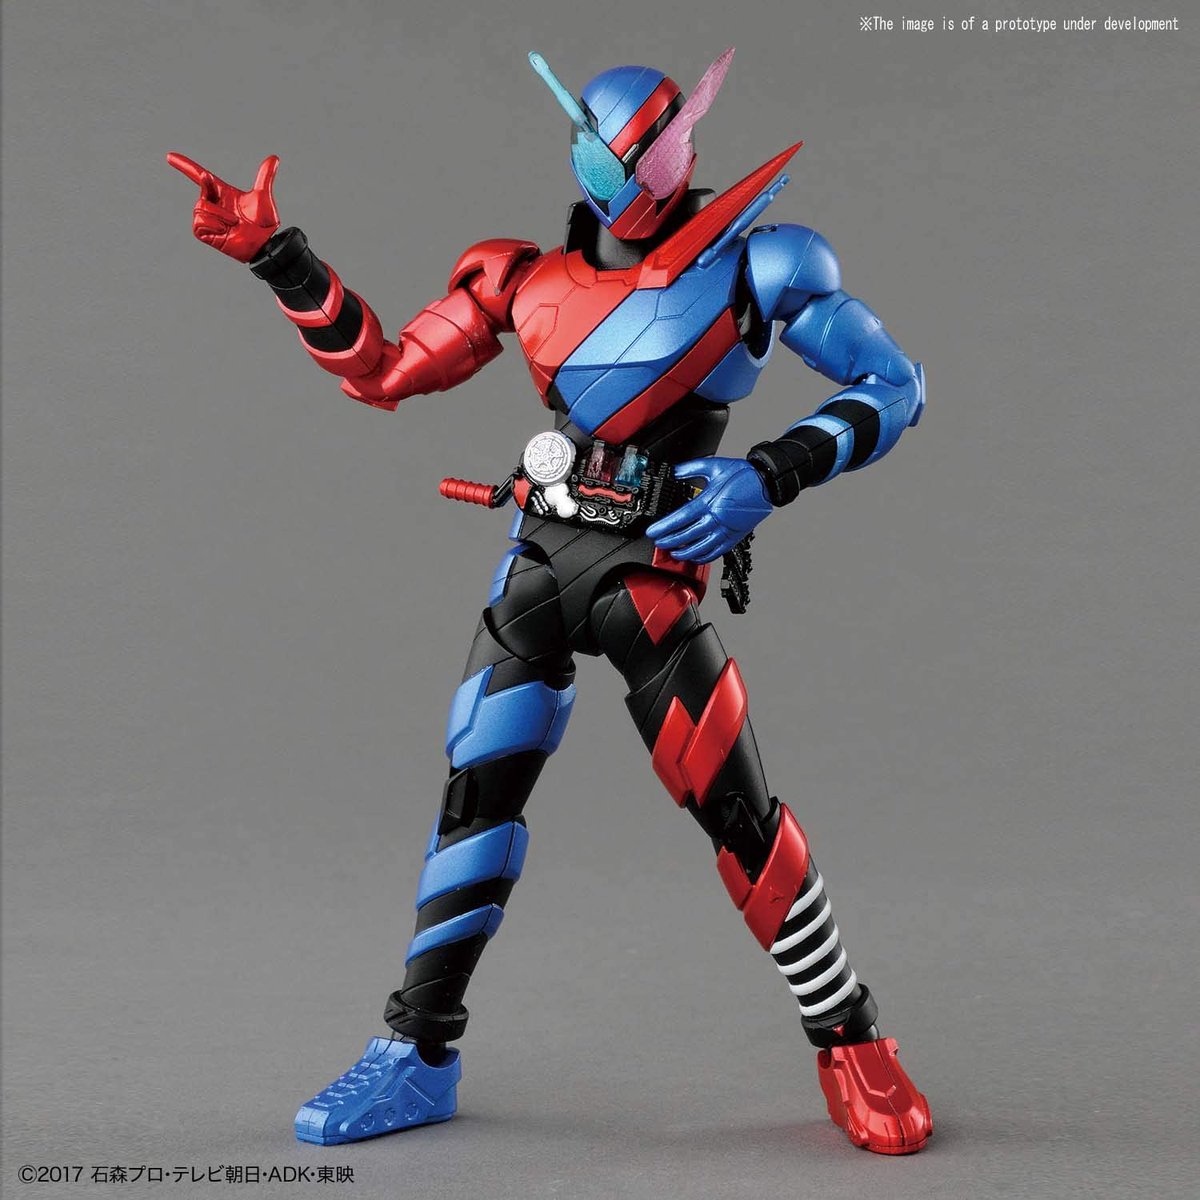 Oh you want something NOT based on the one franchise, Gundam? Turns out there are others. Bandai makes far and above the most reliably good kits. Check out the Figure-Rise line for totally awesome variety like Dragon Ball, Dr. Slump (love this one), Kamen Rider, and Ultraman.